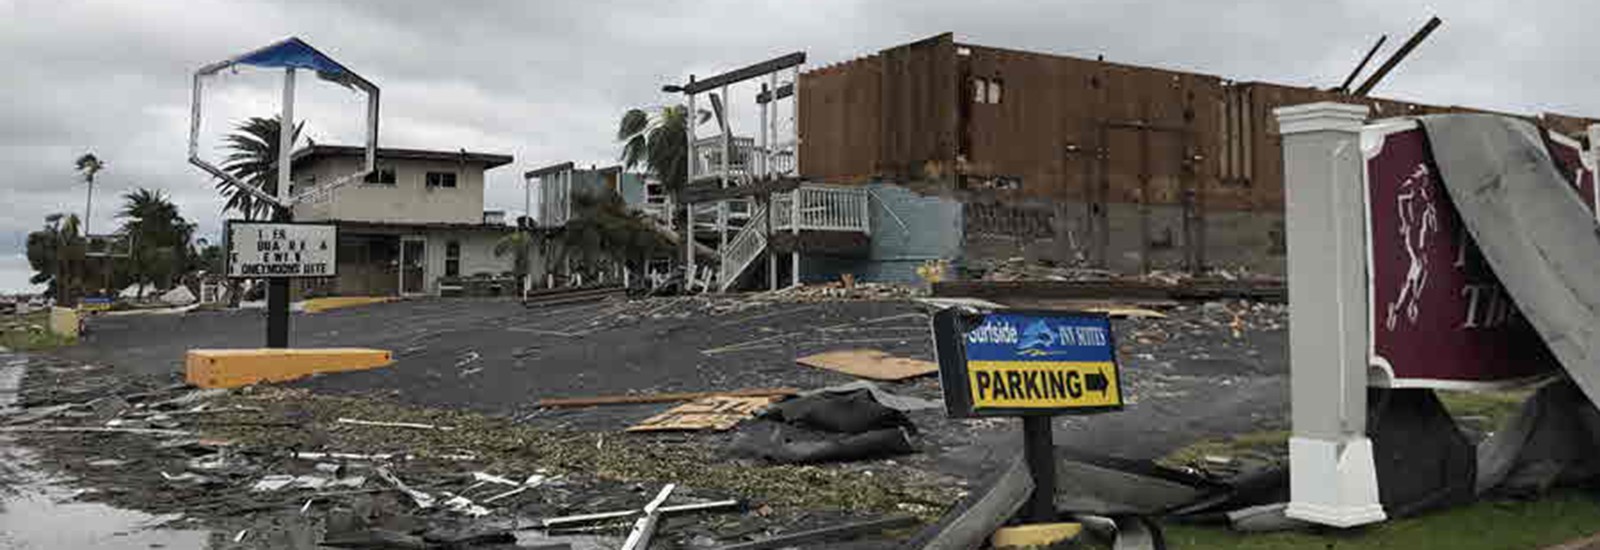 storm debris and a damaged building under a cloudy sky in Rockport, TX, following Hurricane Harvey in 2017